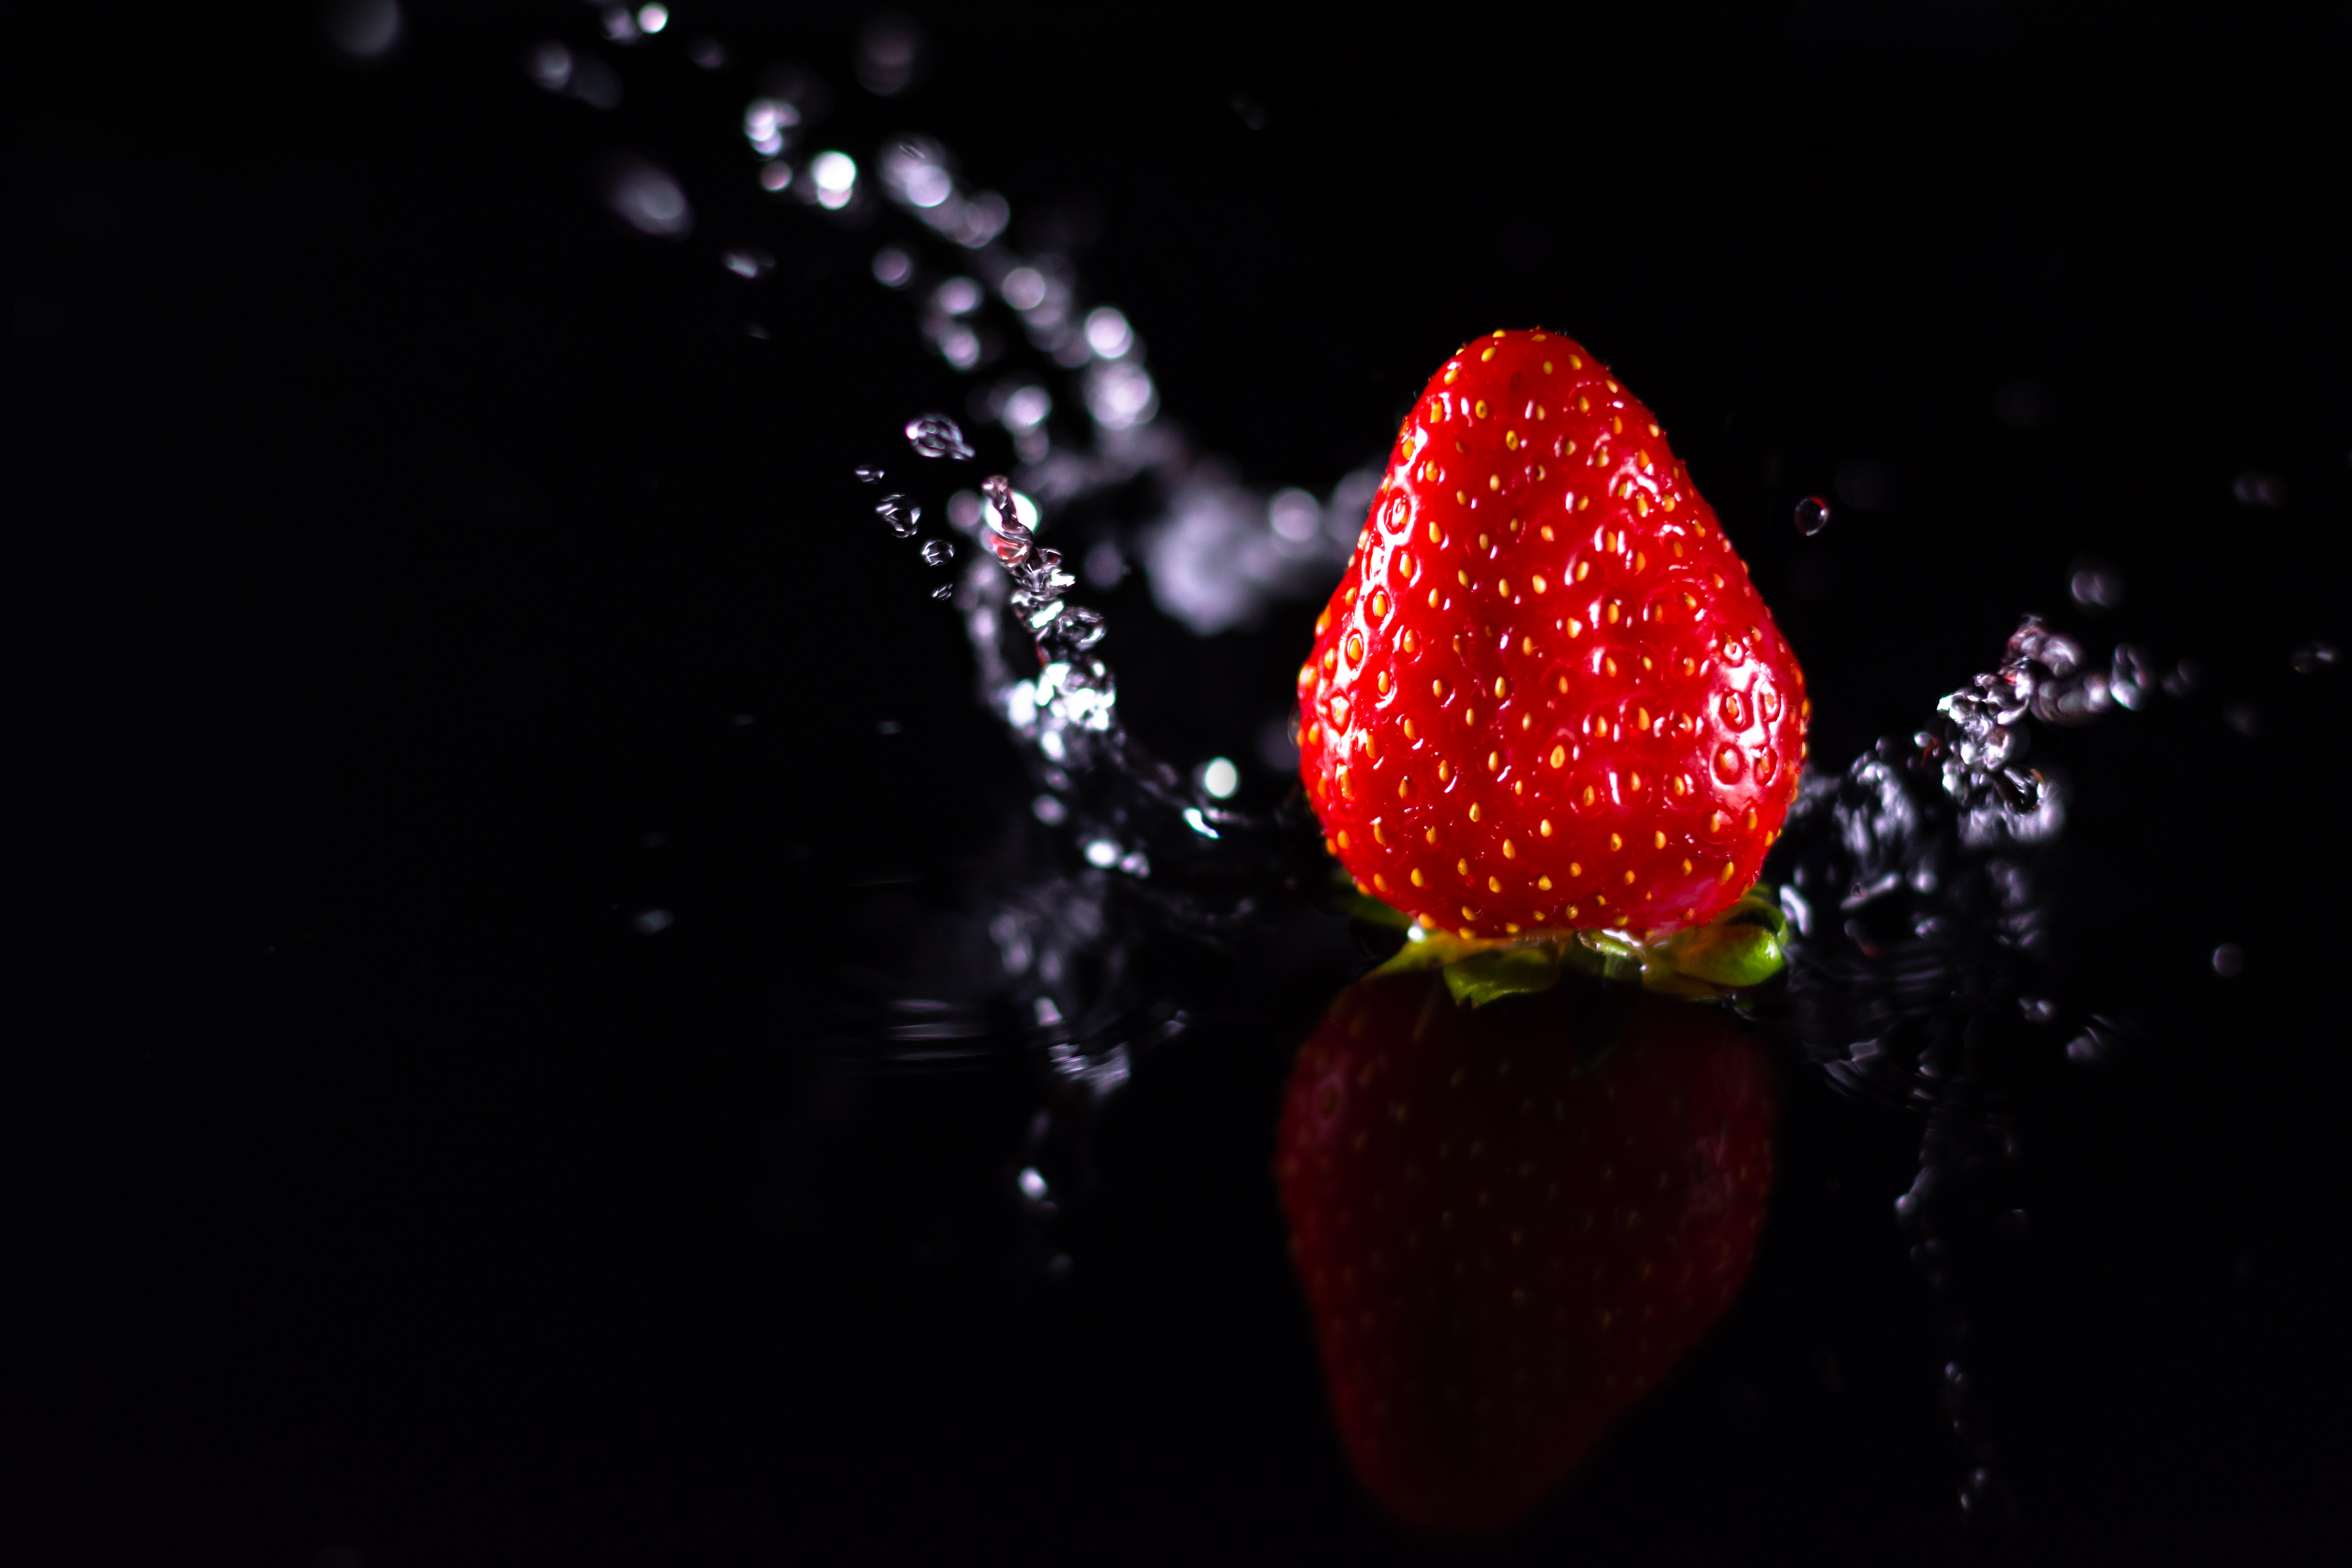 83269 download wallpaper strawberry, water, macro, spray, berry screensavers and pictures for free